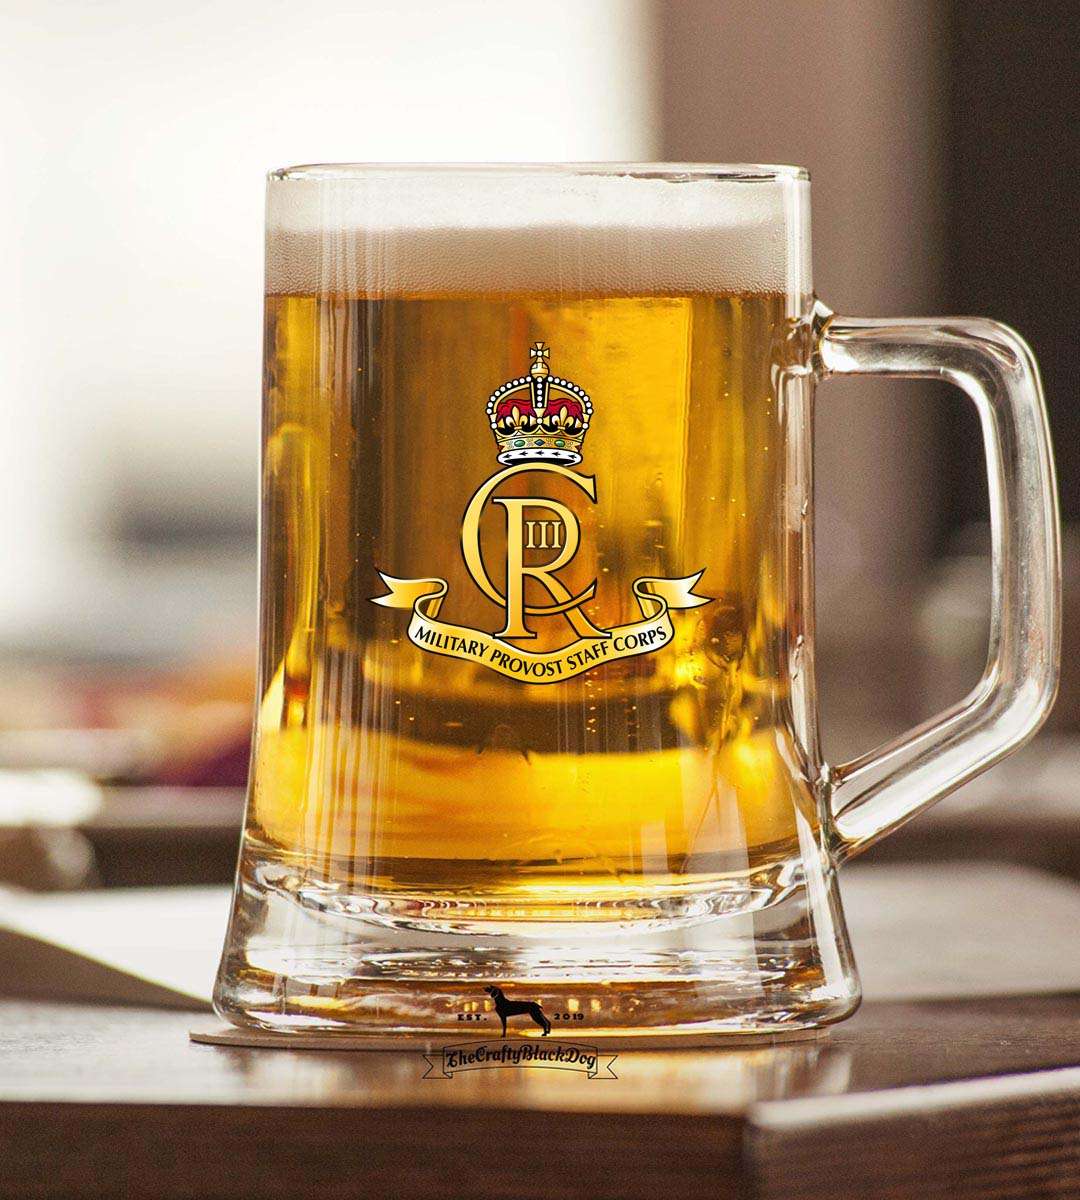 Military Provost Staff Corps - TANKARD (New King's Crown)